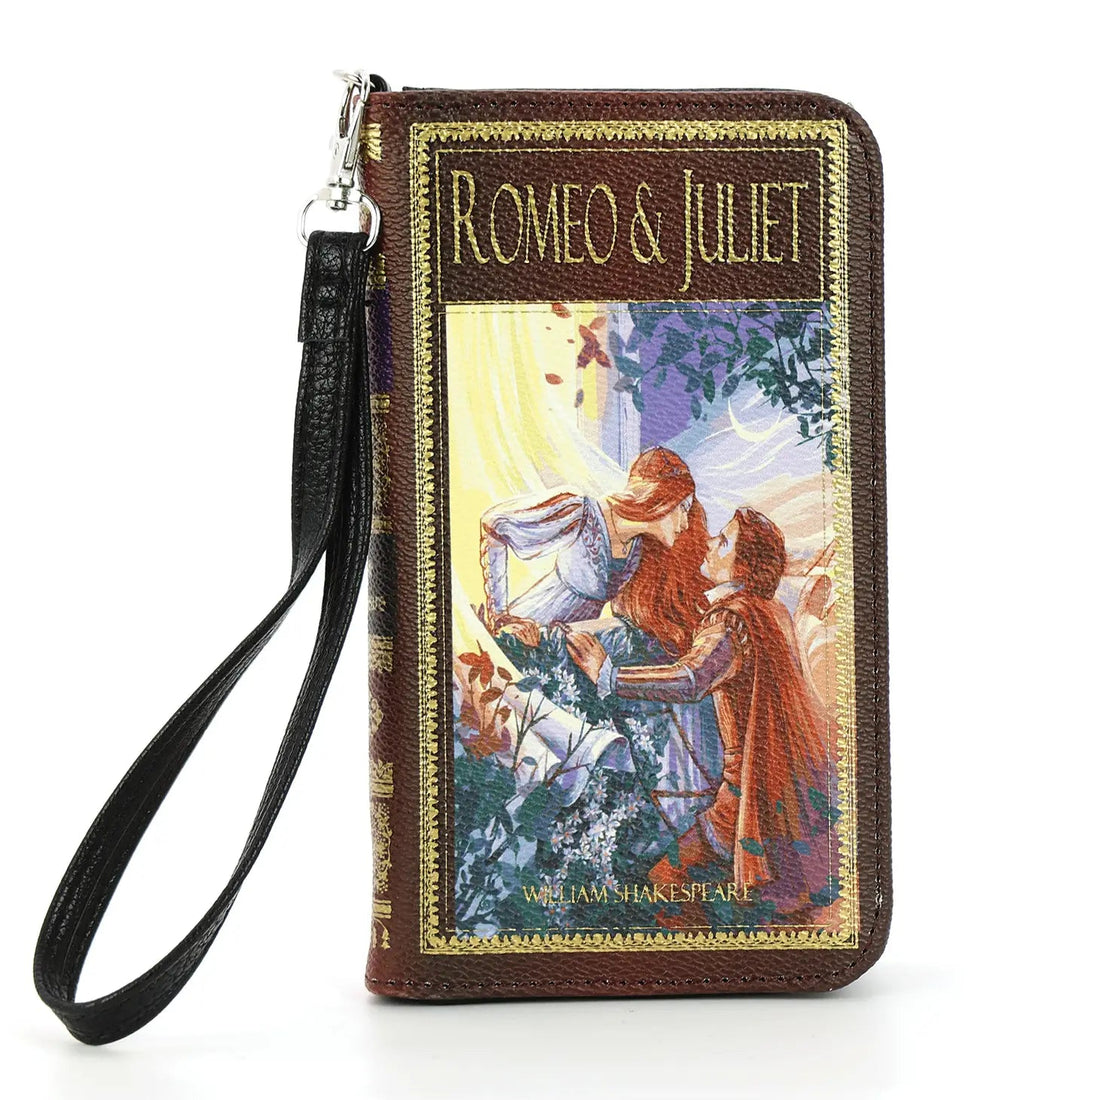 Shop Romeo and Juliet Book Wallet in Vinyl - Premium Clutch Bag from Comeco INC Online now at Spoiled Brat 